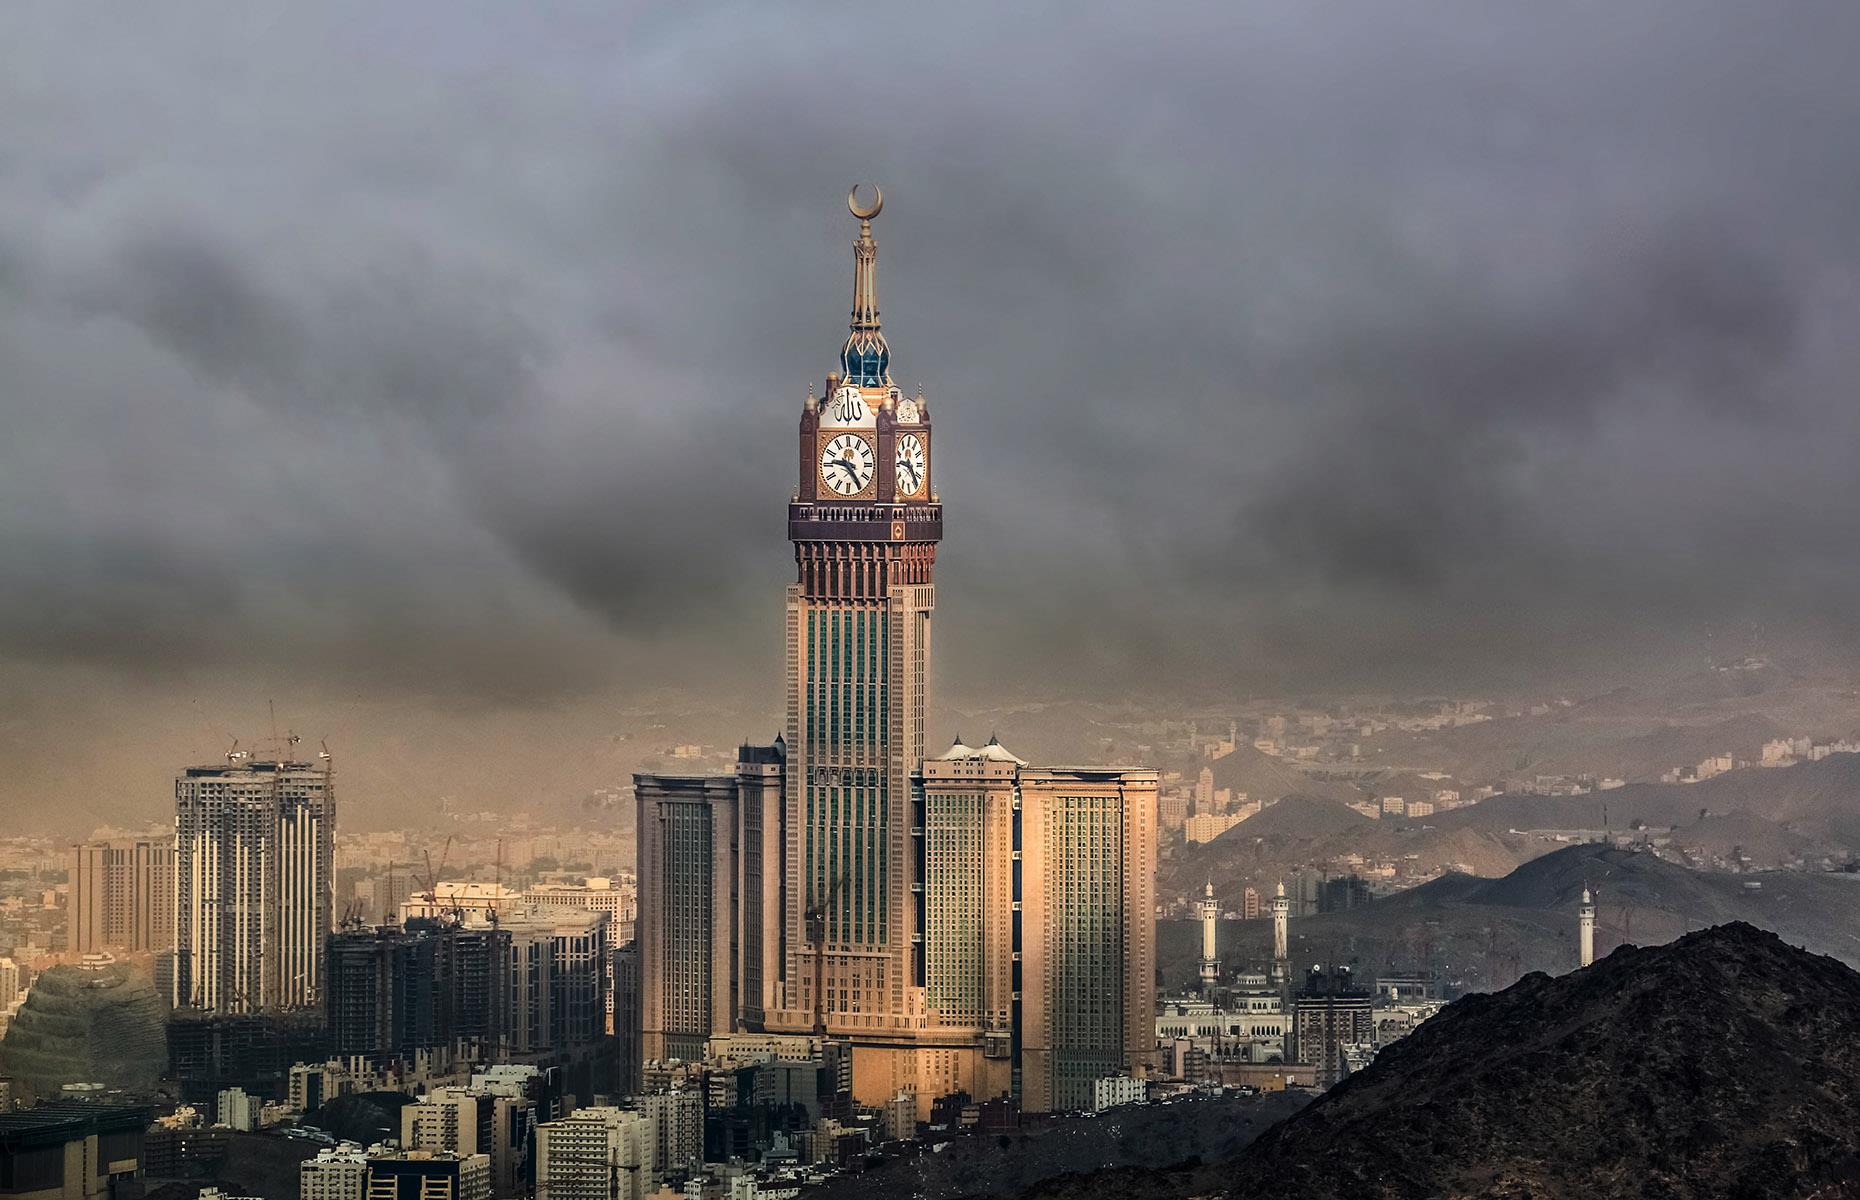 <p>The tallest clock tower in the world – certified by Guinness World Records on completion in 2012 – this marvel of modern architecture reaches a sky-piercing 1,972 feet, and is reportedly the second most expensive building ever constructed. Near the sacred Great Mosque of Mecca, it's surrounded by six subsidiary towers, which together make up the Abraj Al Bait complex. The complex hosts, among other things, several luxury hotels and a five-story shopping mall.</p>